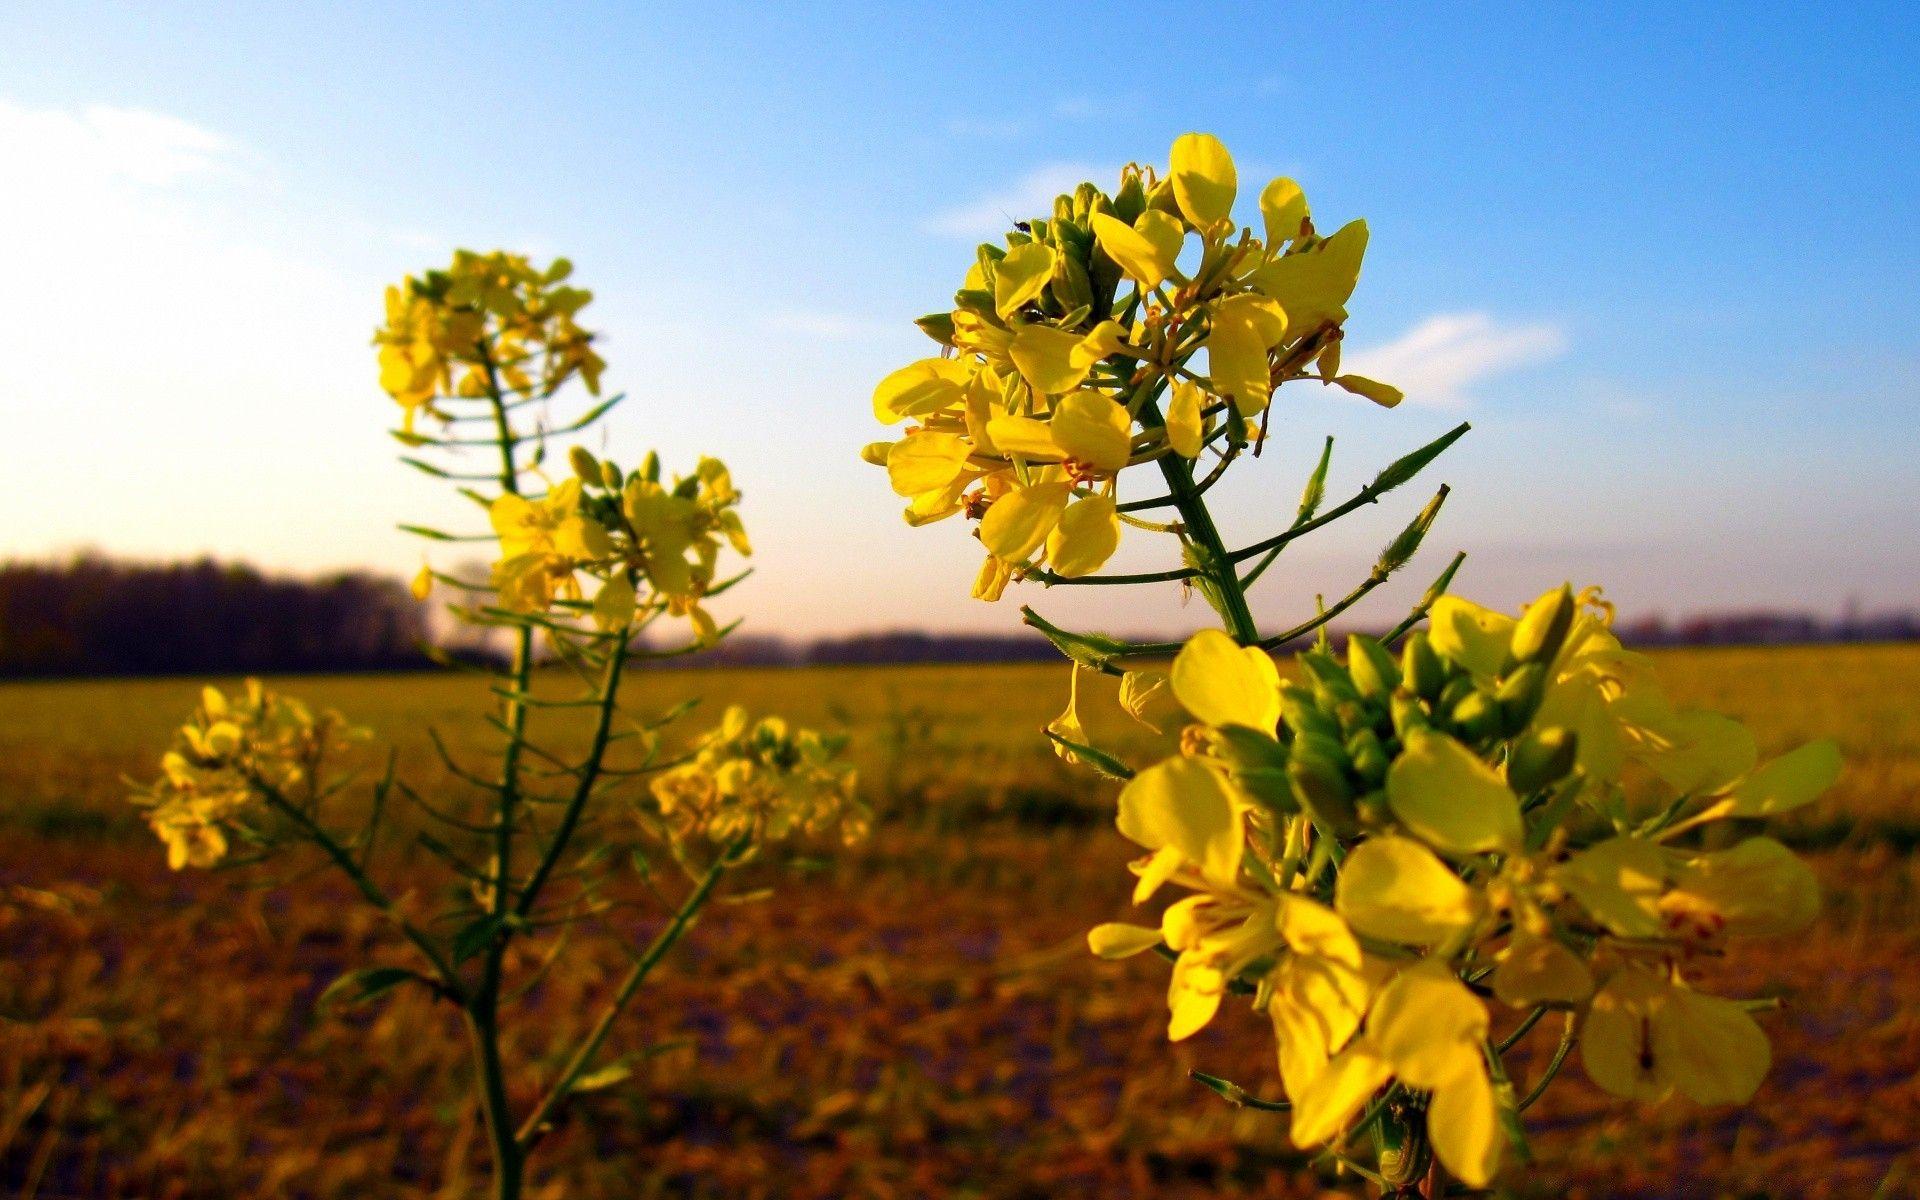 Wild Mustard Flower. Android wallpaper for free